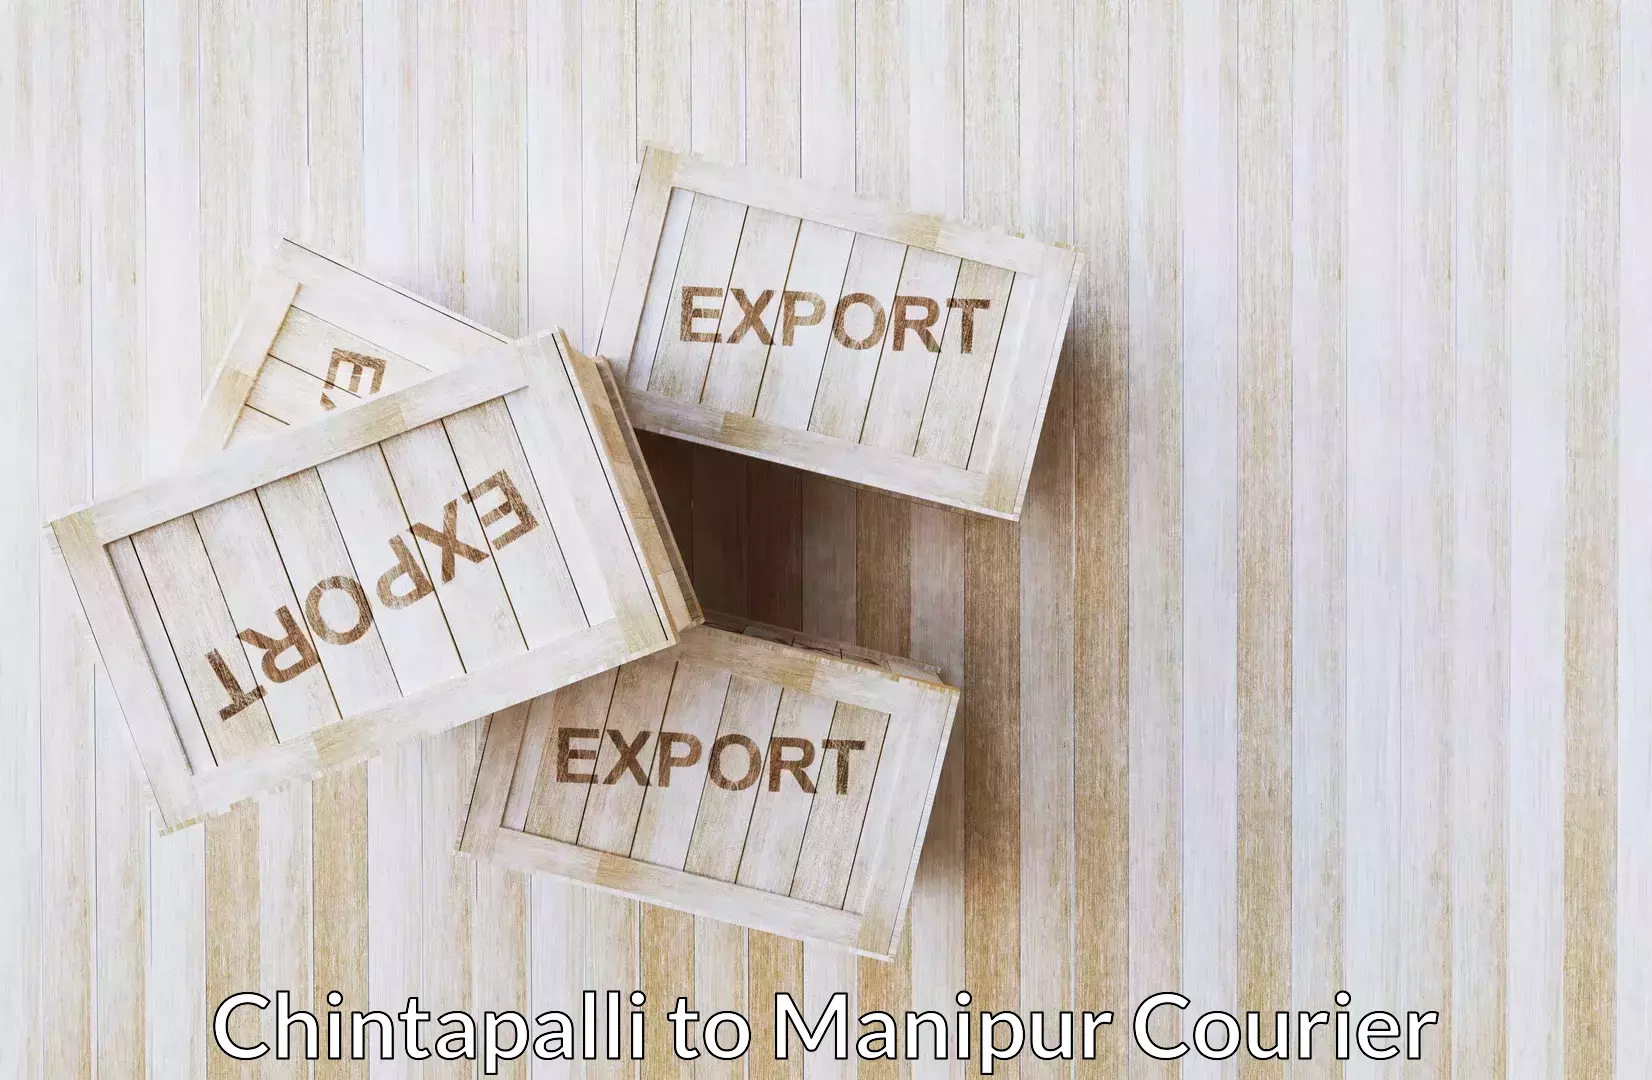 Professional moving company Chintapalli to Manipur